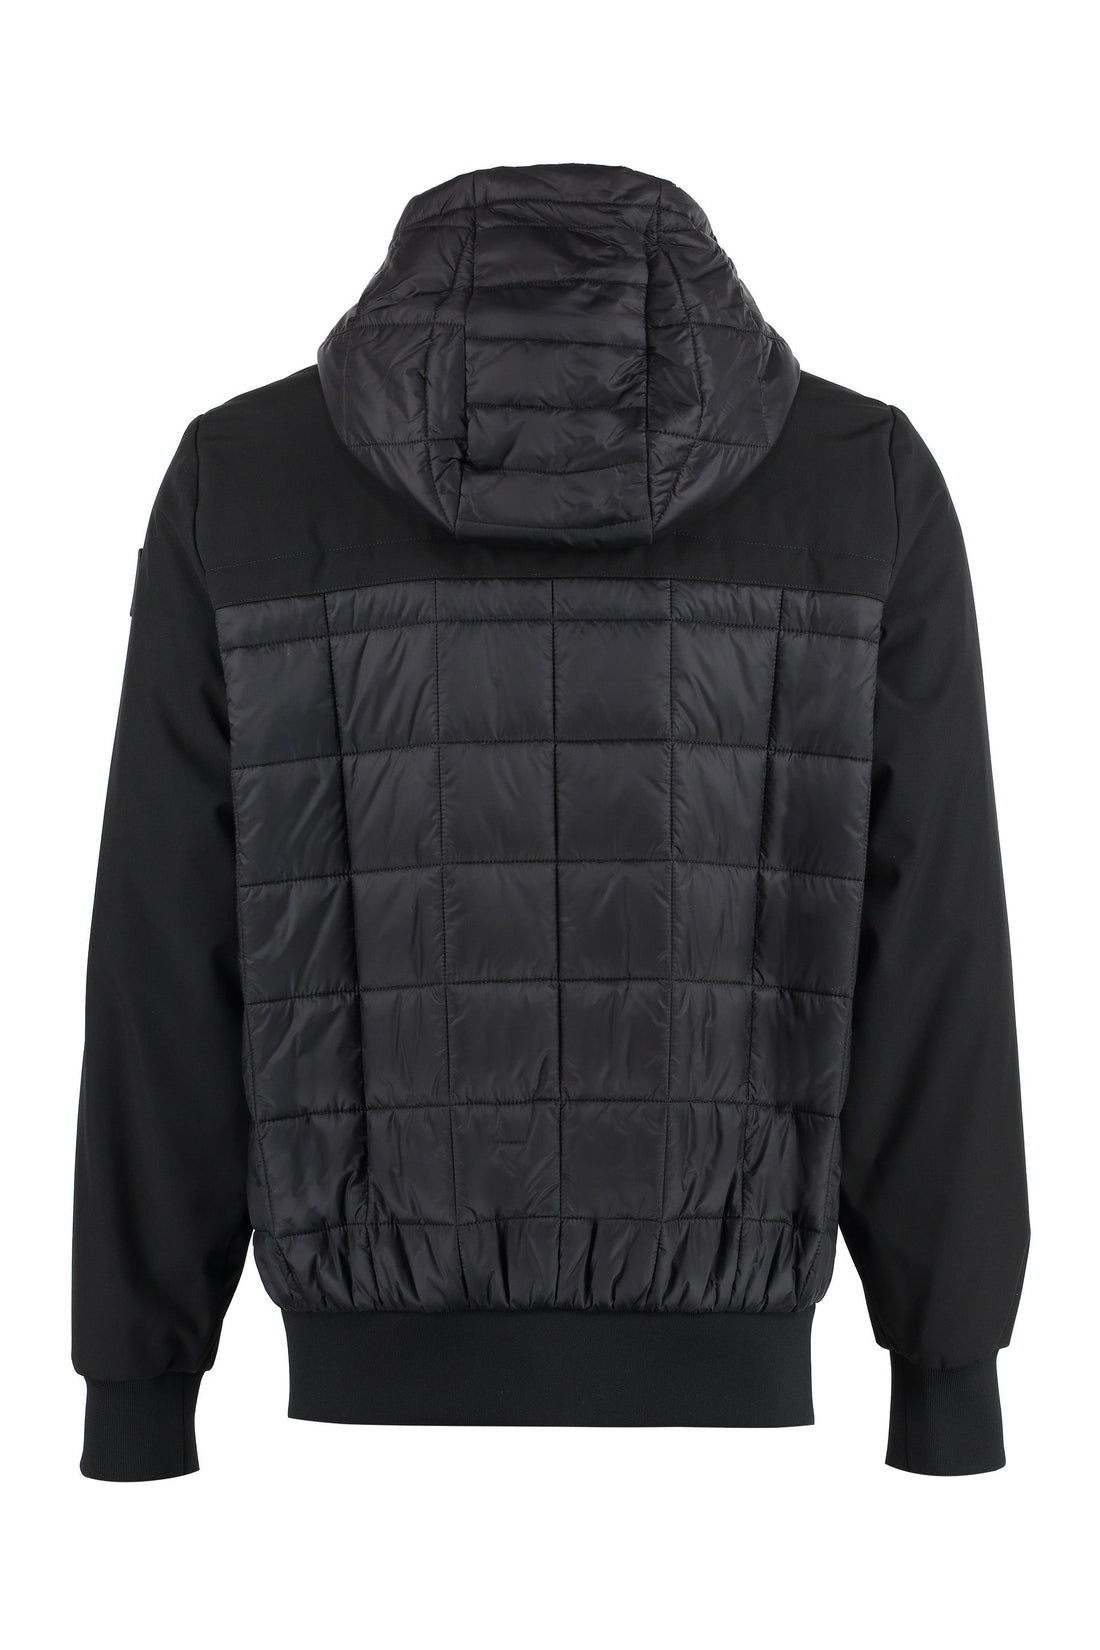 Moose Knuckles-OUTLET-SALE-Adelaide techno-nylon down jacket-ARCHIVIST